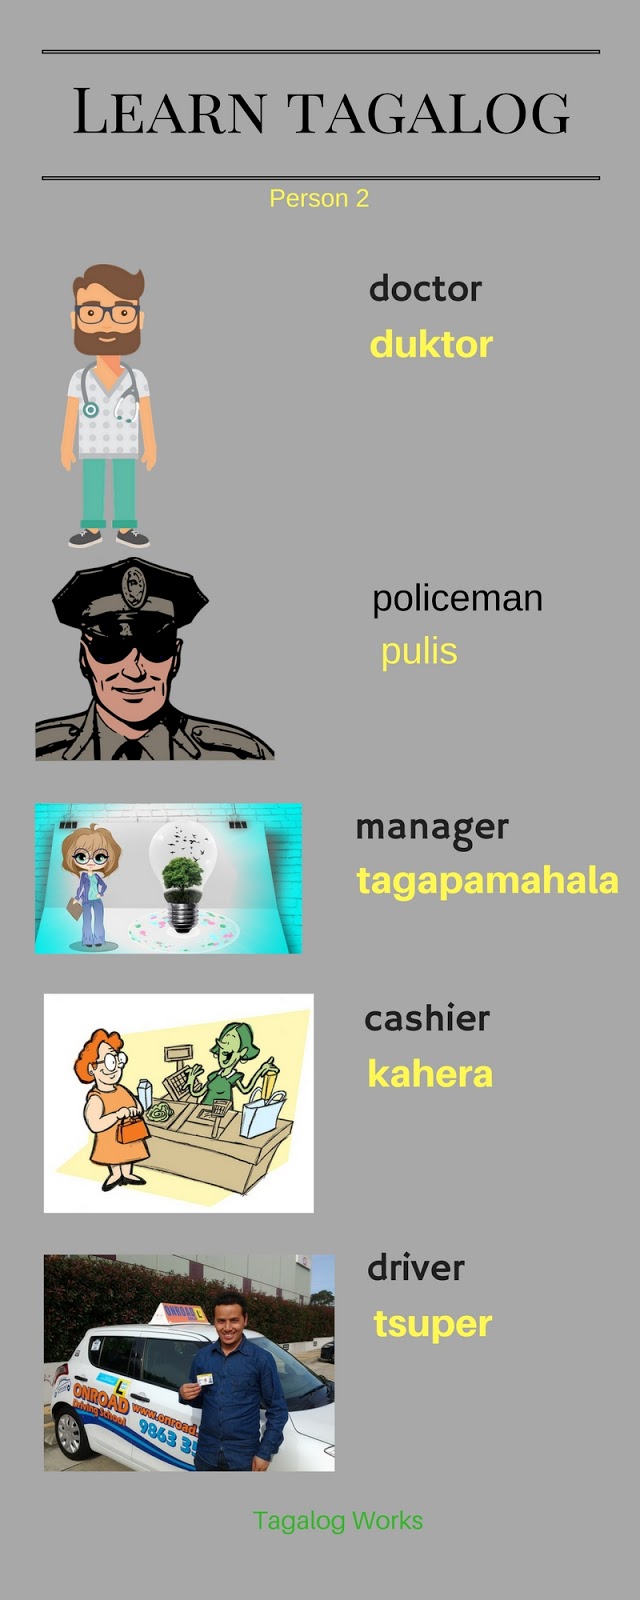 occupations-in-tagalog